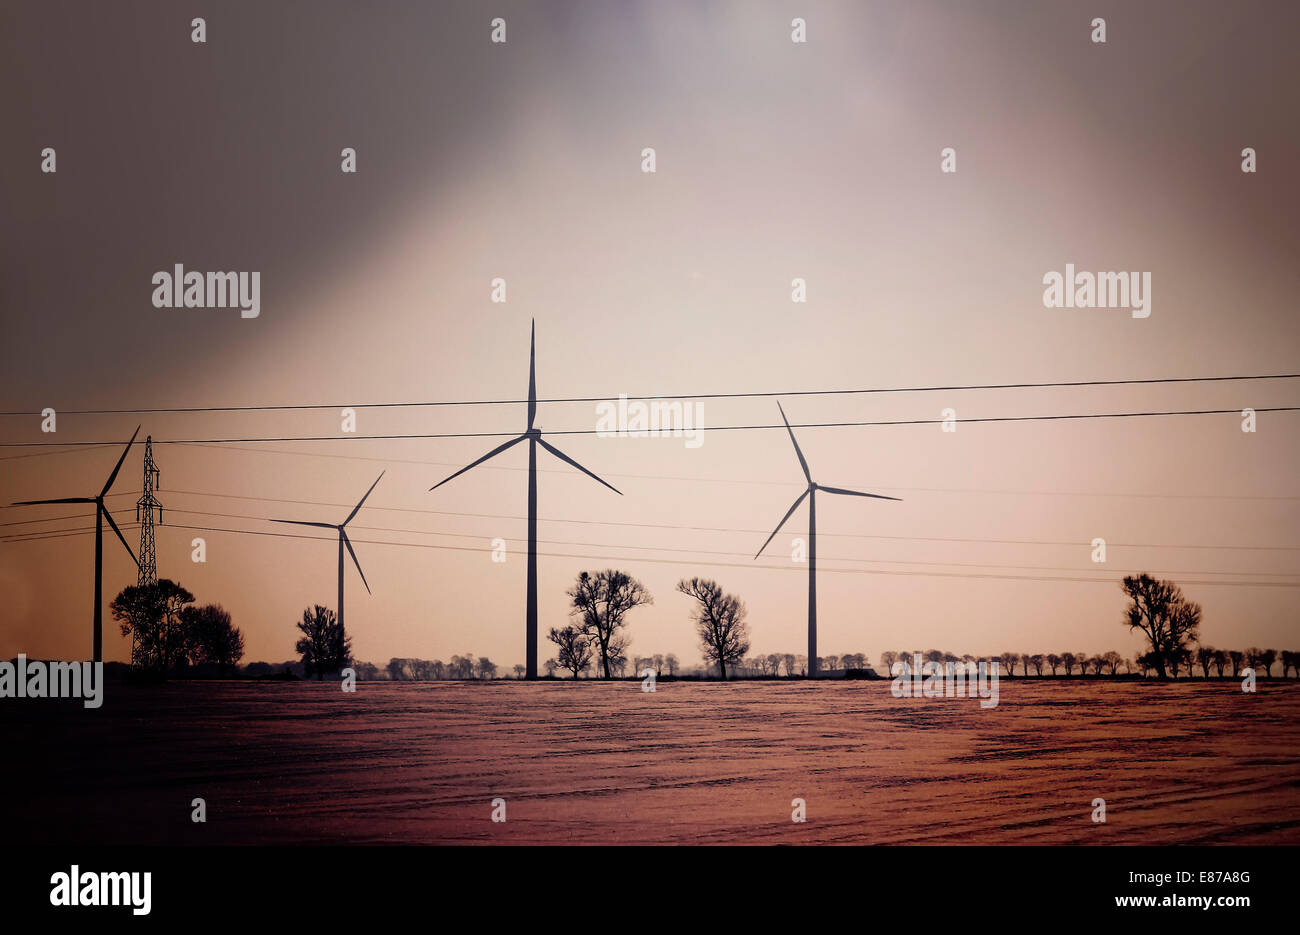 Retro dark abstract picture of wind turbines on field. Stock Photo